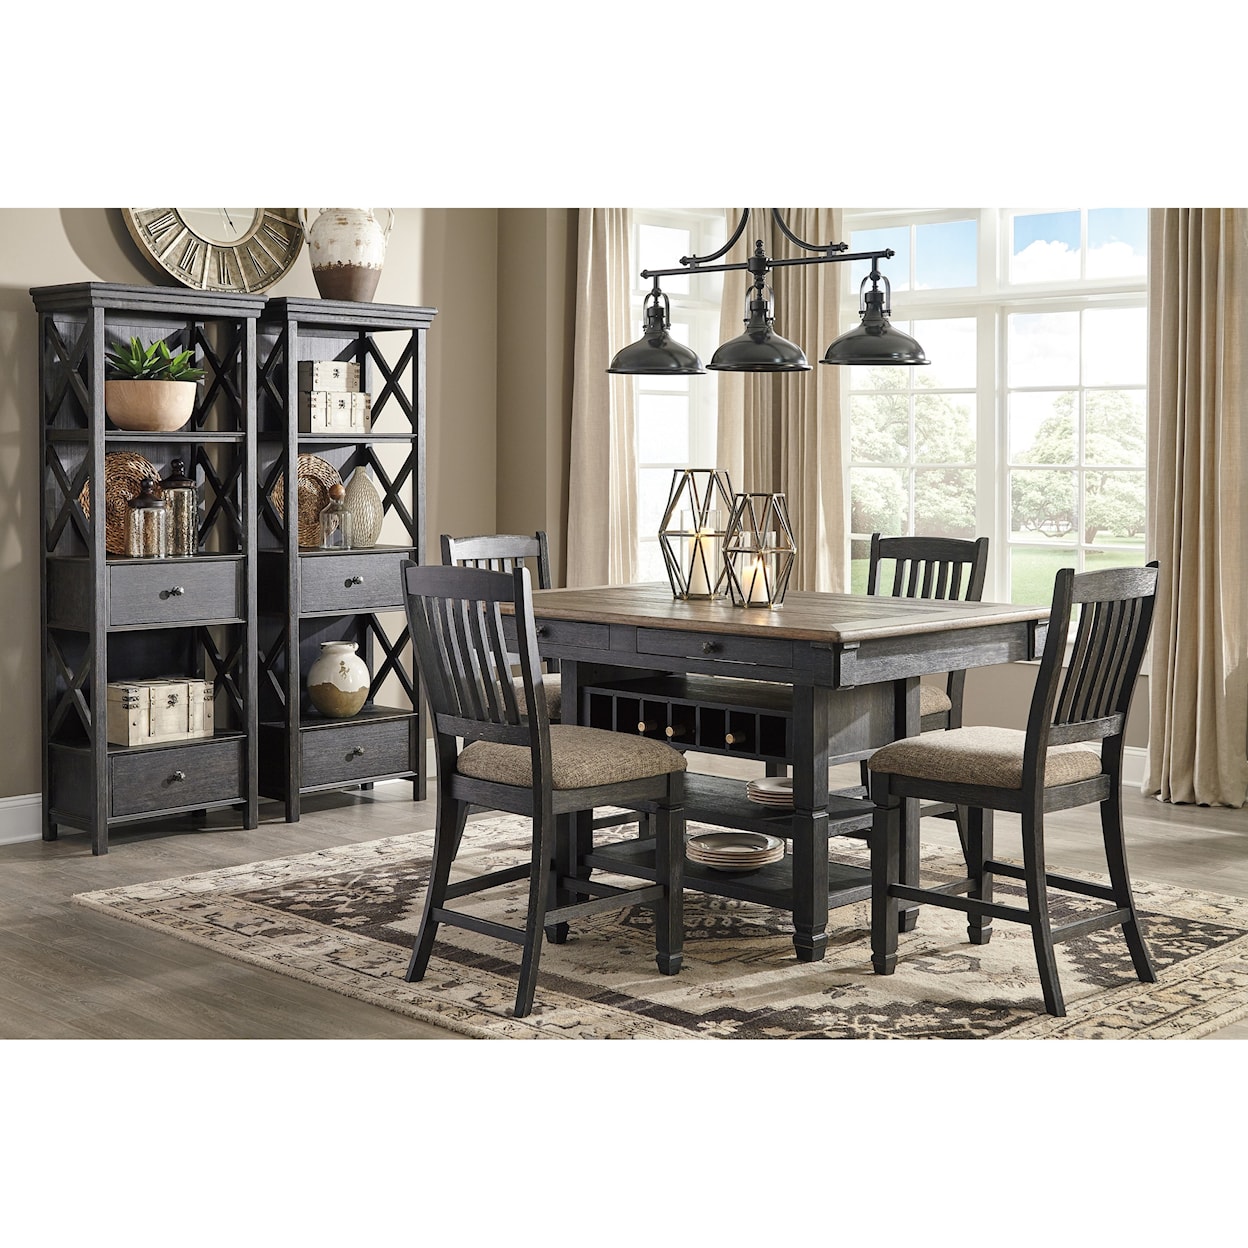 Ashley Furniture Signature Design Tyler Creek Casual Dining Room Group